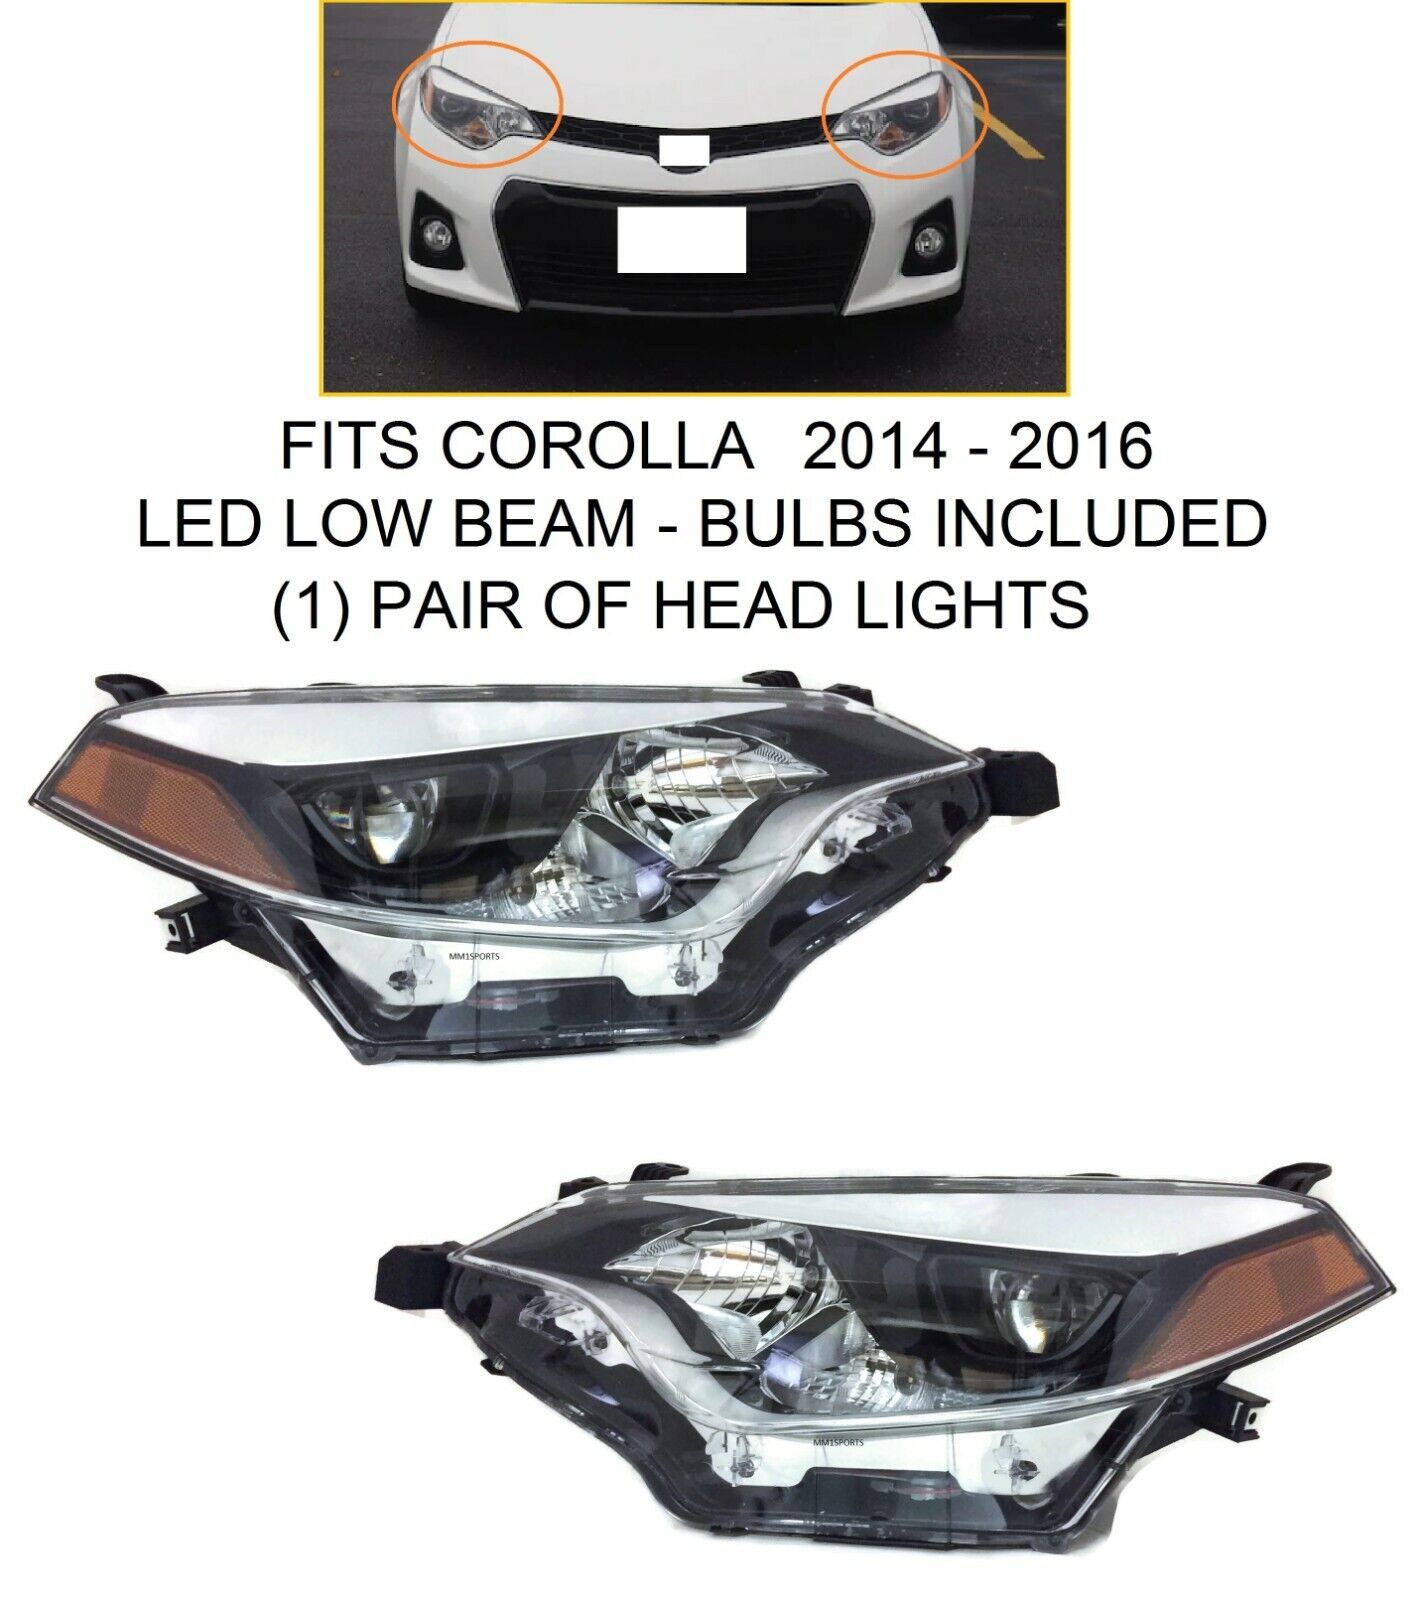 NEW PAIR LED HEADLIGHTS FOR FITS 2014-2016 TOYOTA COROLLA PASSENGER & DRIVER